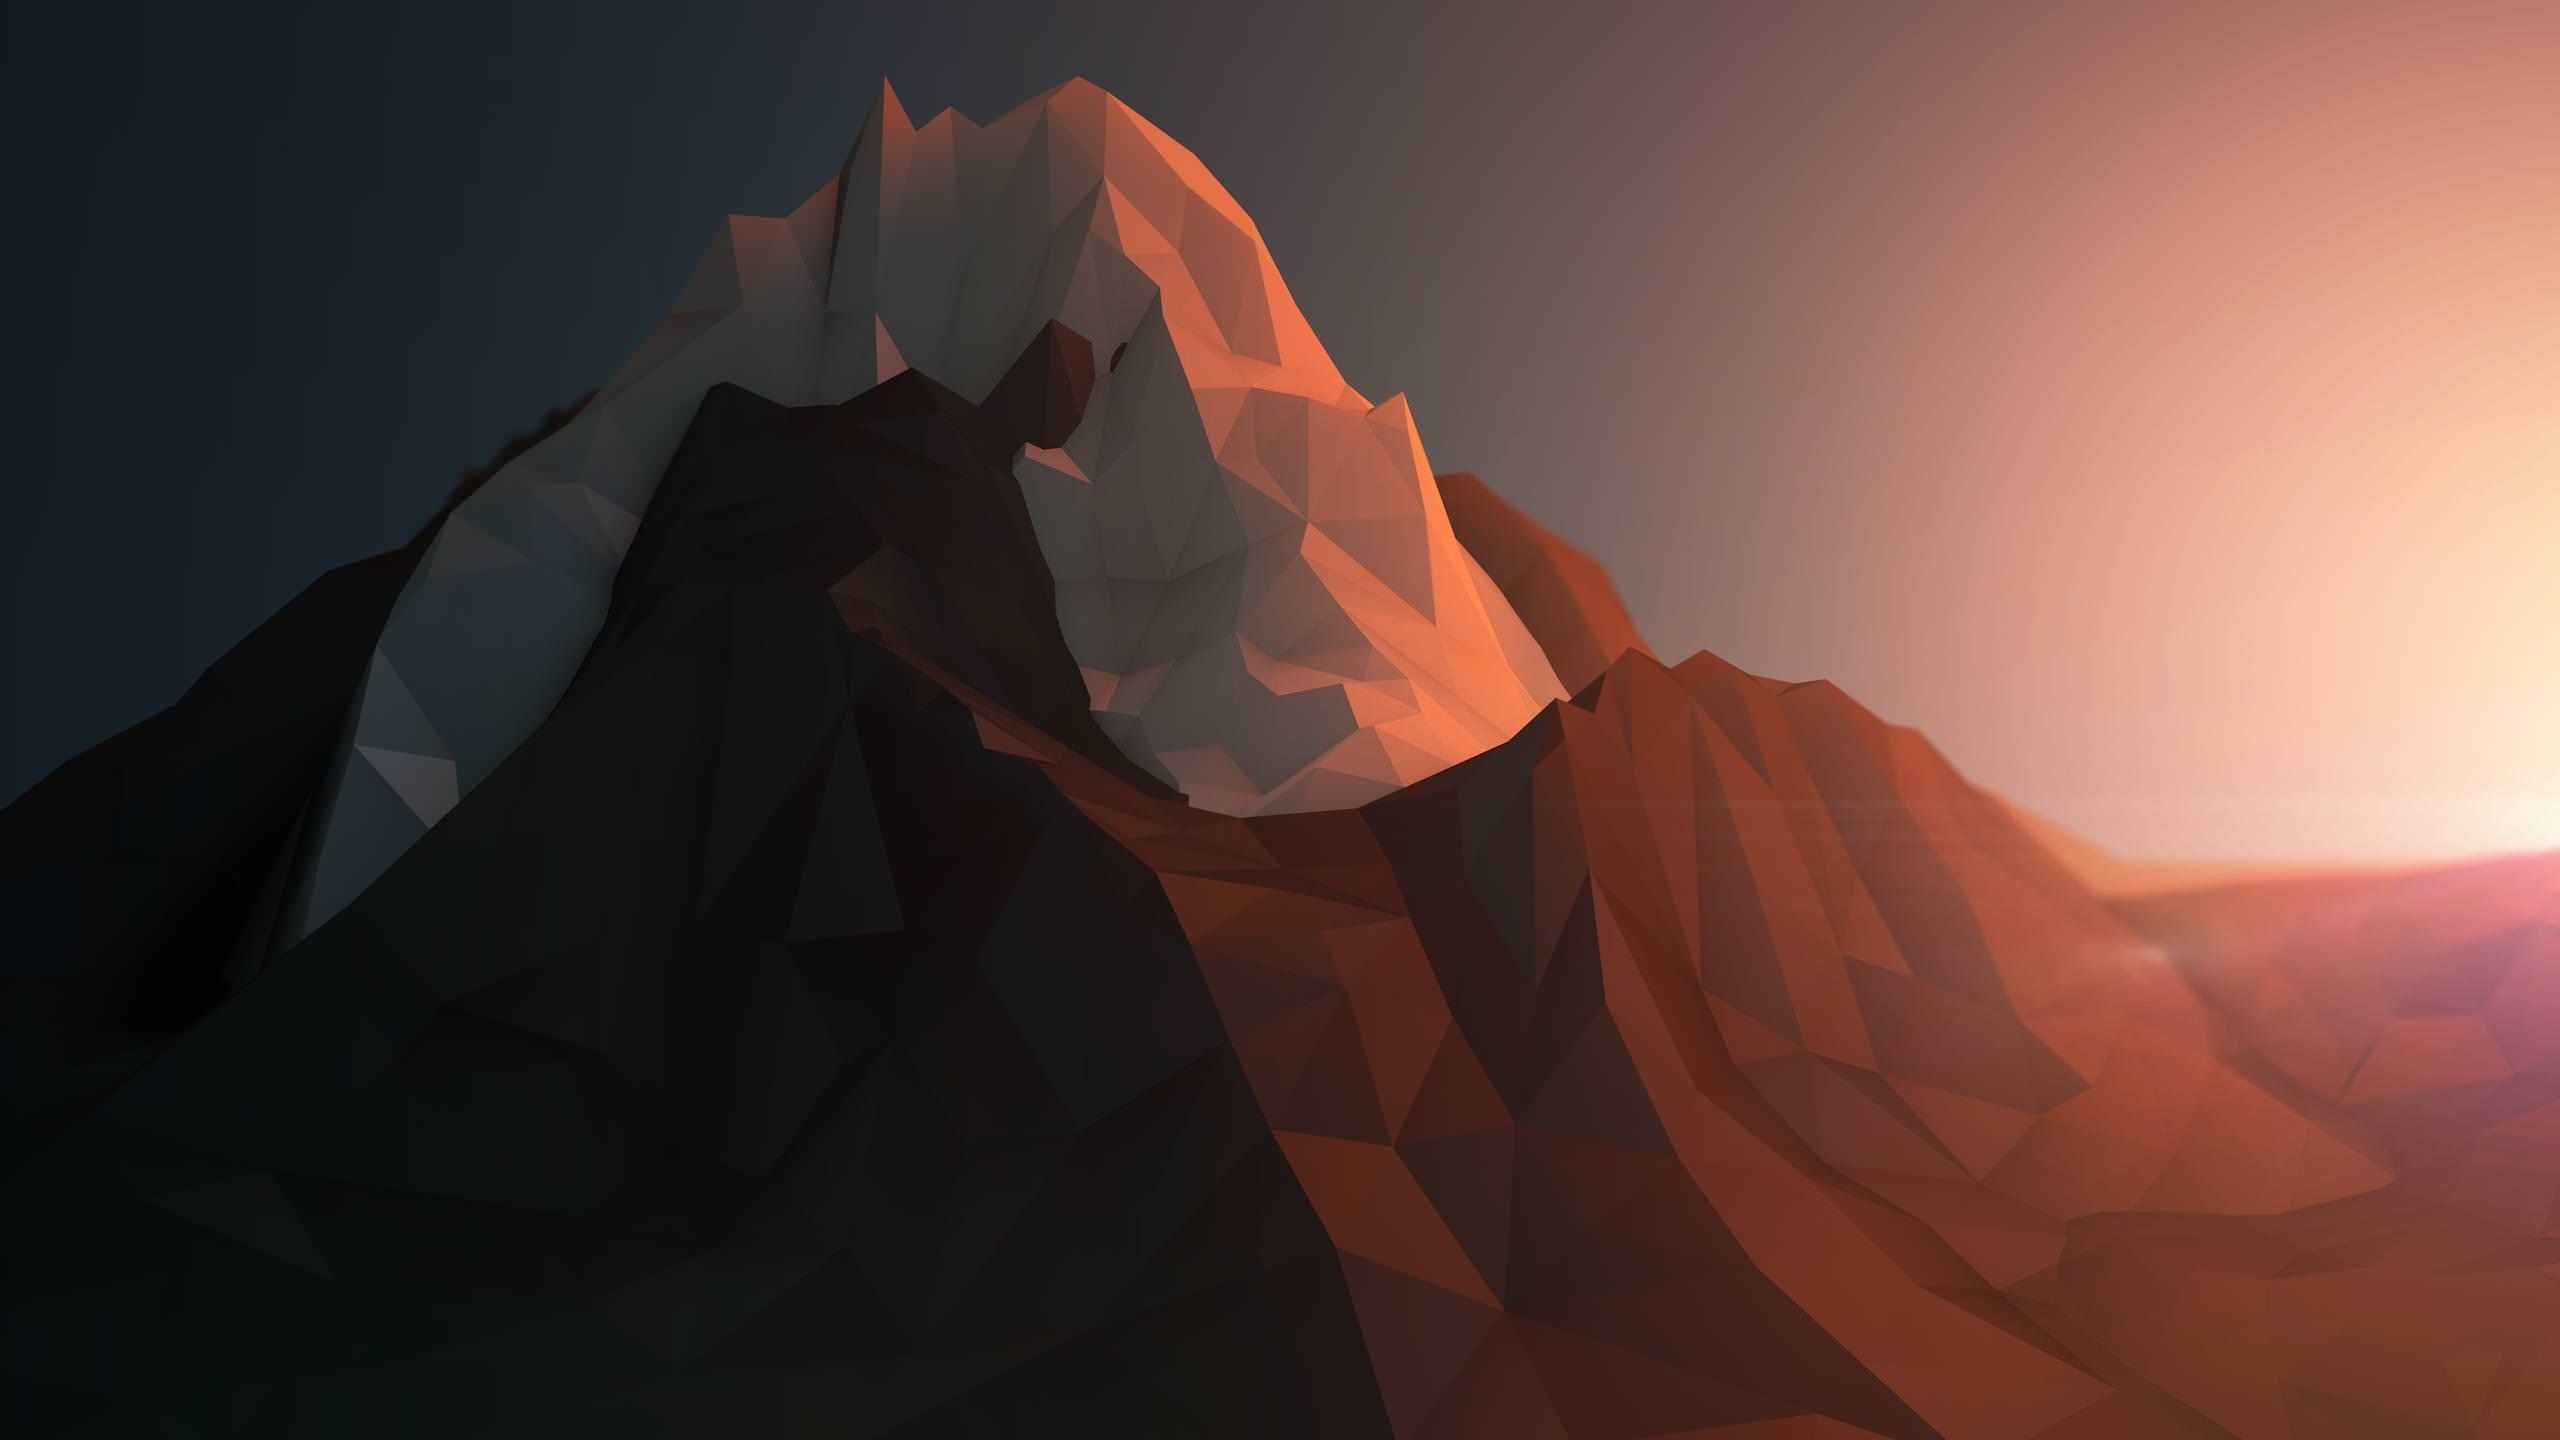 Low poly illustration of a mountain at sunset - Low poly